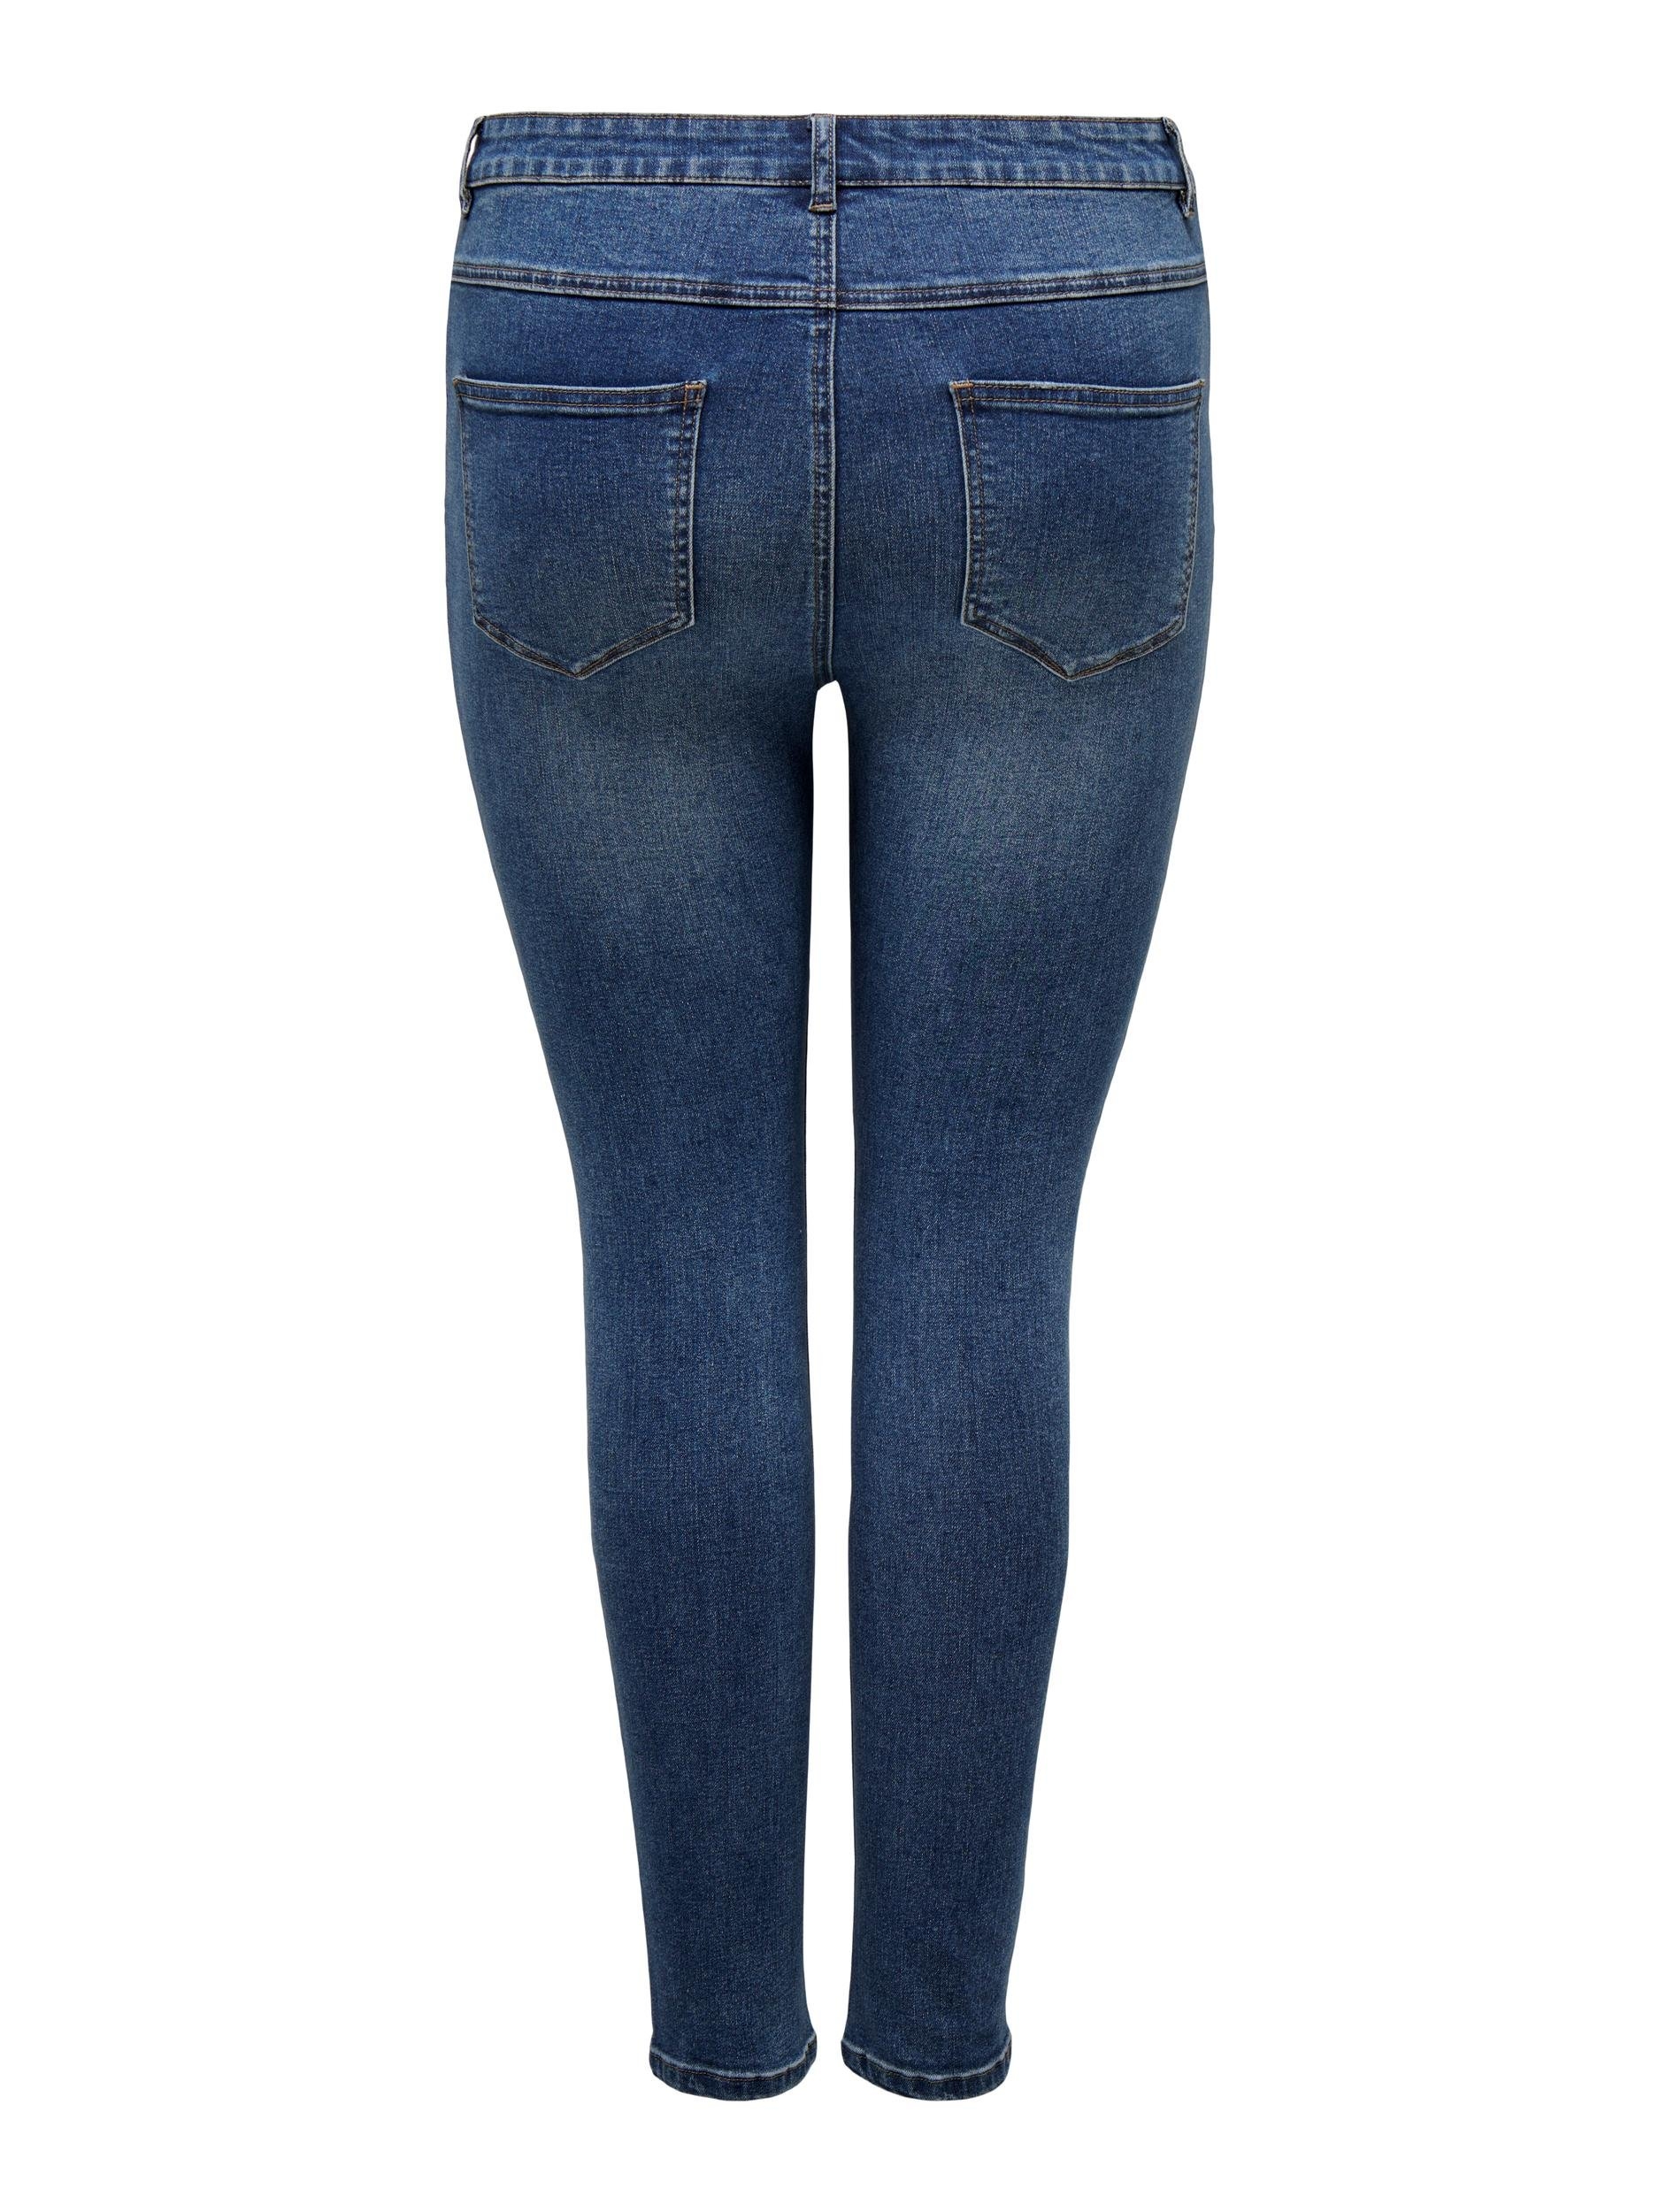 ONLY CARMAKOMA Skinny fit jeans CARROSE HW SKINNY DNM GUA939 BF in de  online shop | OTTO